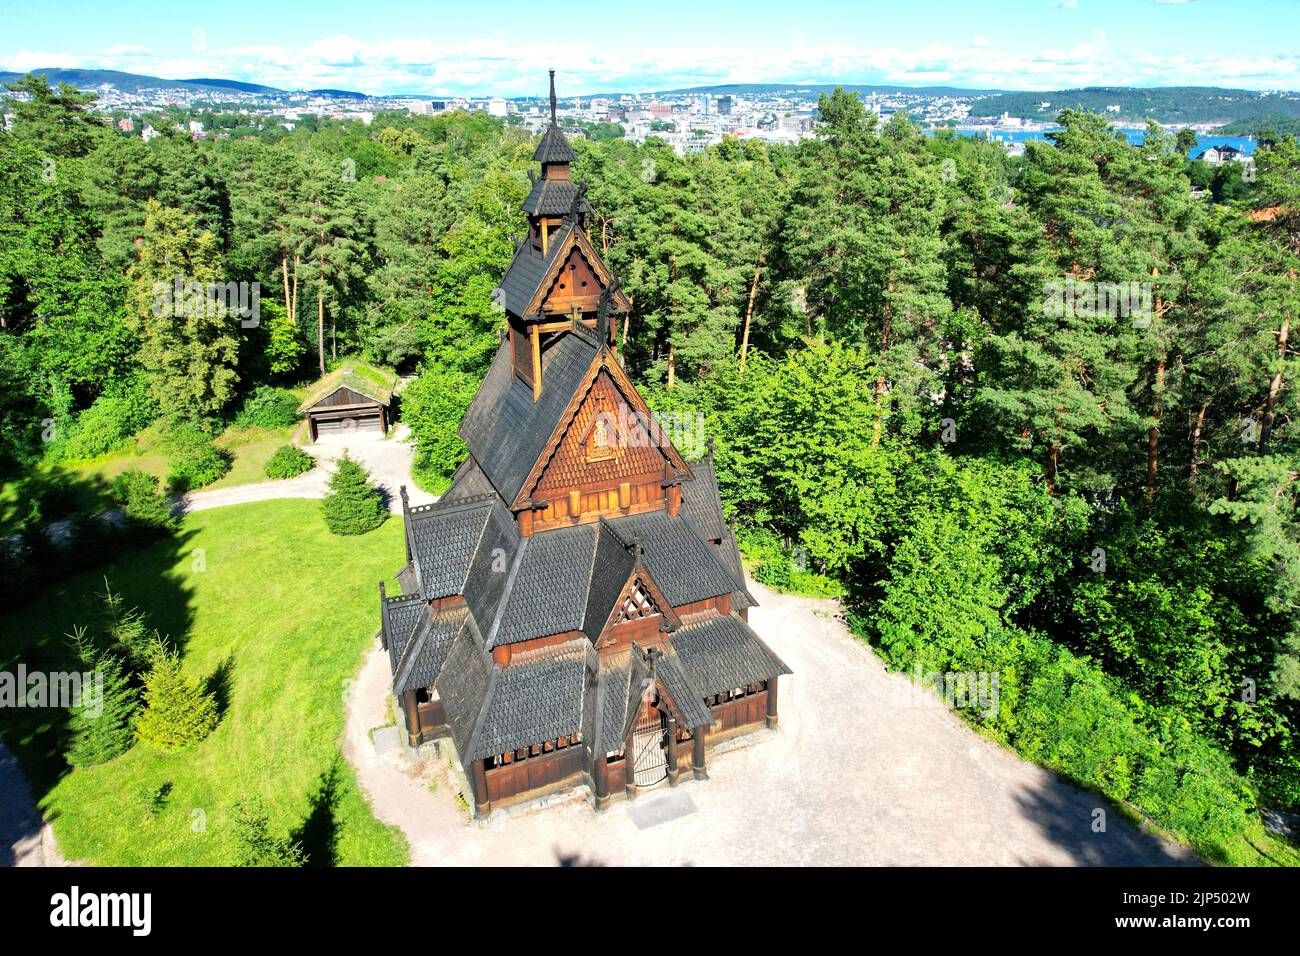 Wooden church “Gol Stave stavkyrkje” in the city of Oslo in Norway Europe on the island aerial view Stock Photo